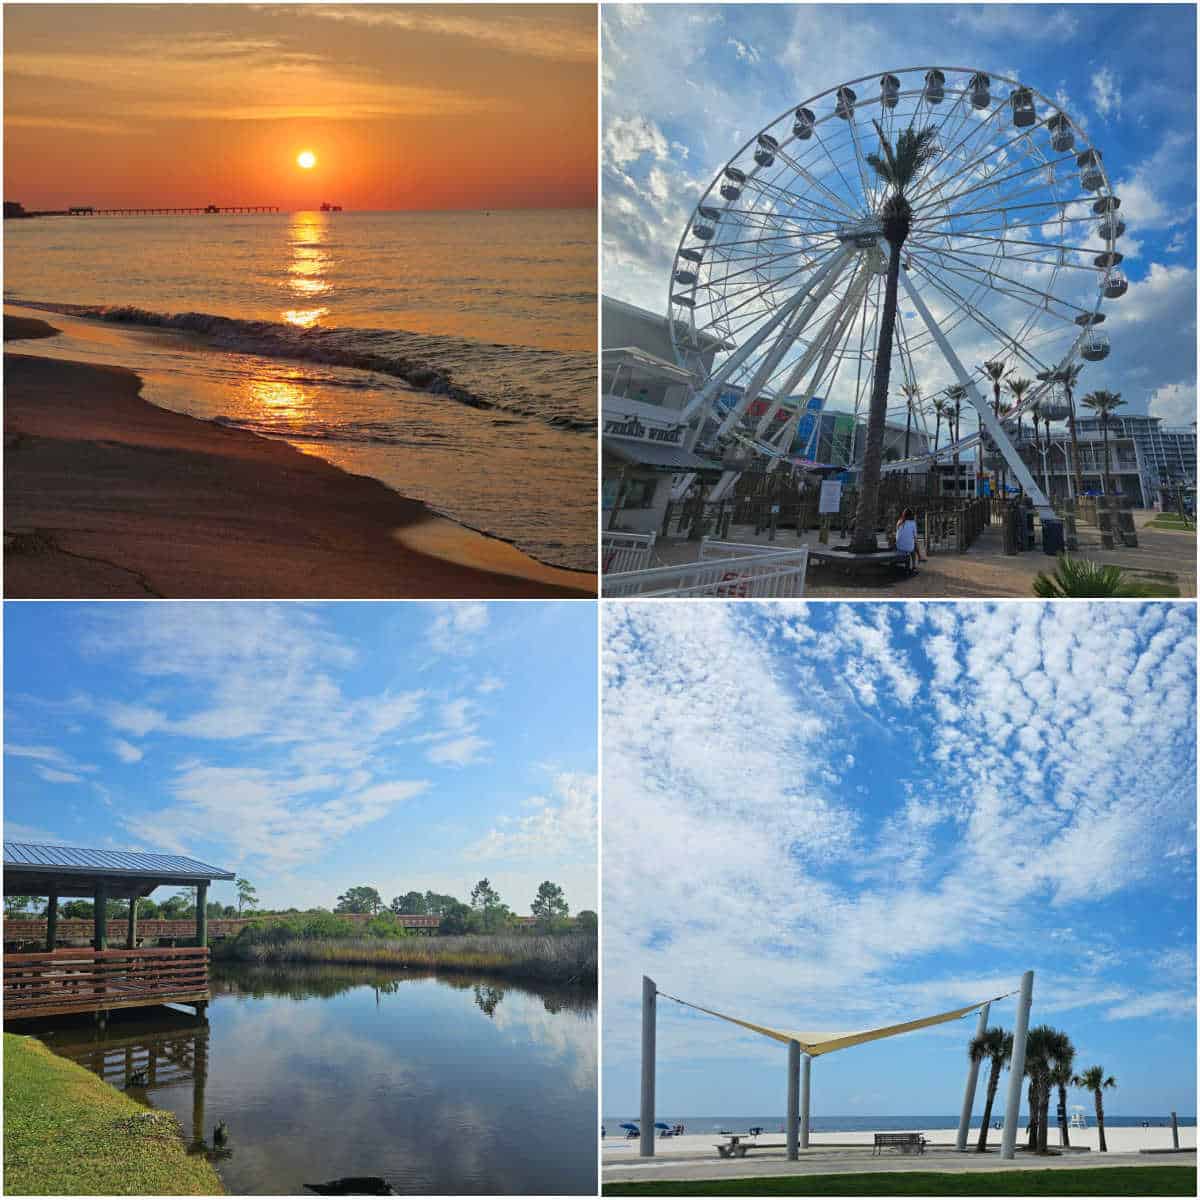 Collage of top things to do in gulf shores and orange beach alabama with sunrise, the wharf ferris wheel, wade ward park, and the beach